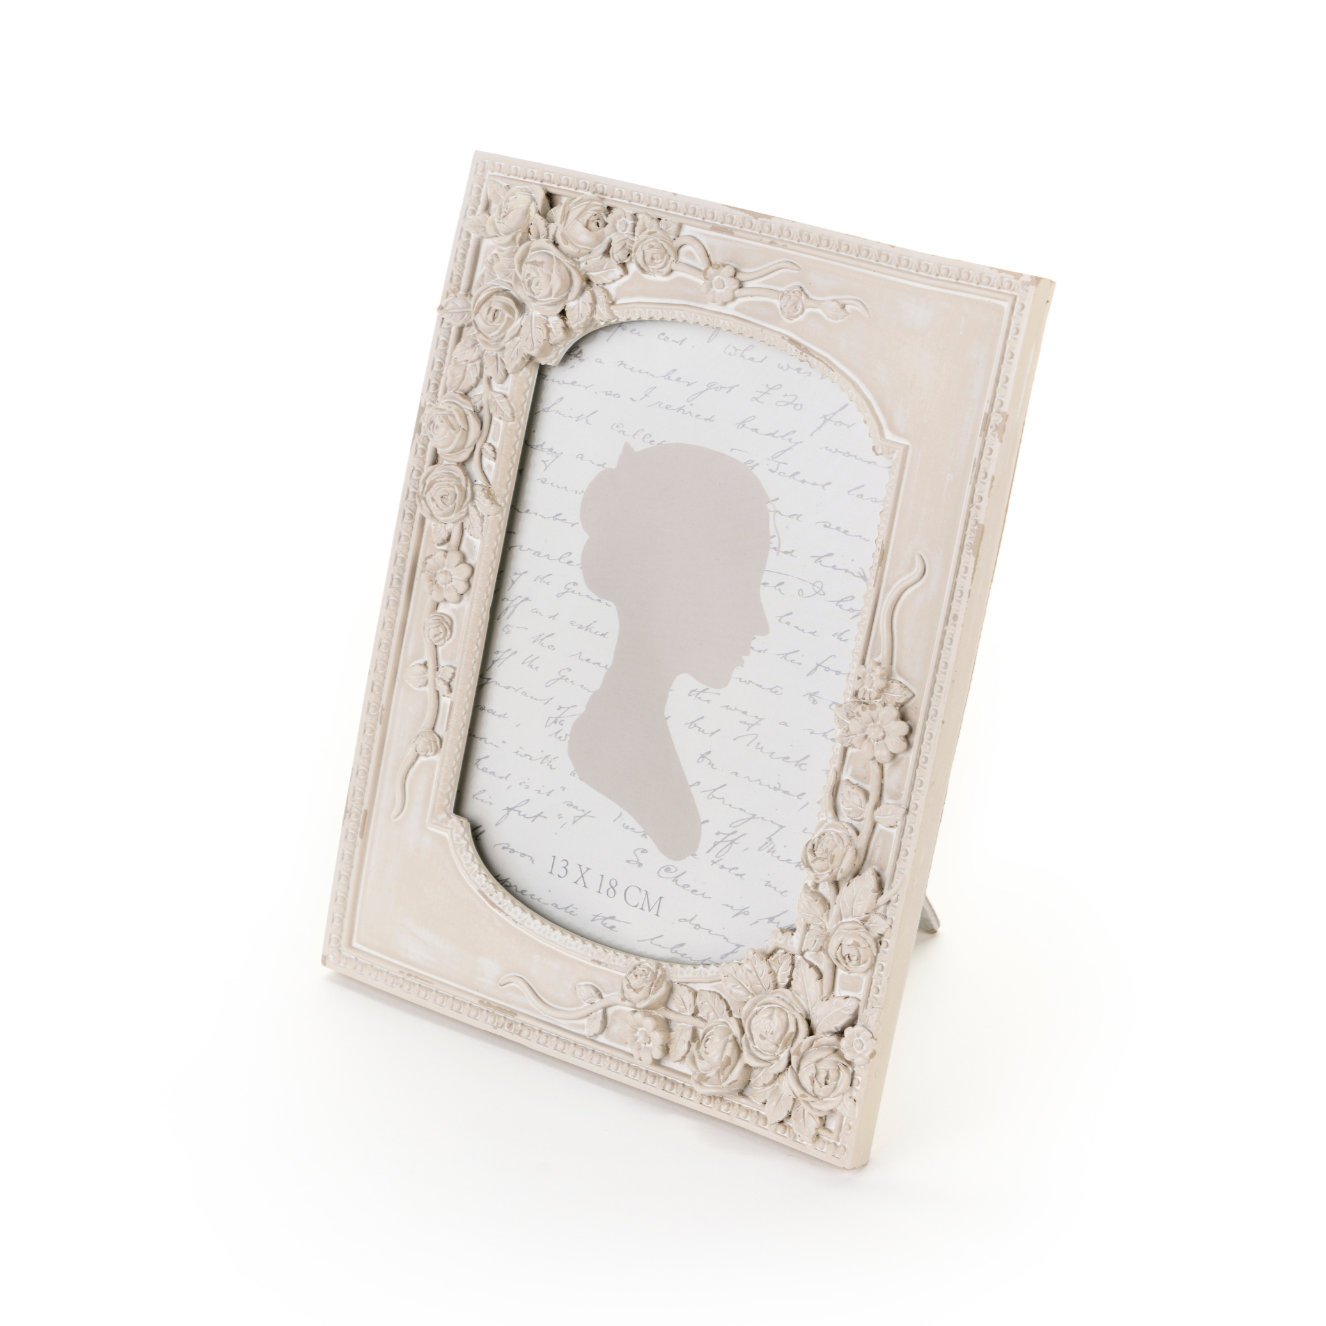 Resin photo frame with roses Clouds of fabric